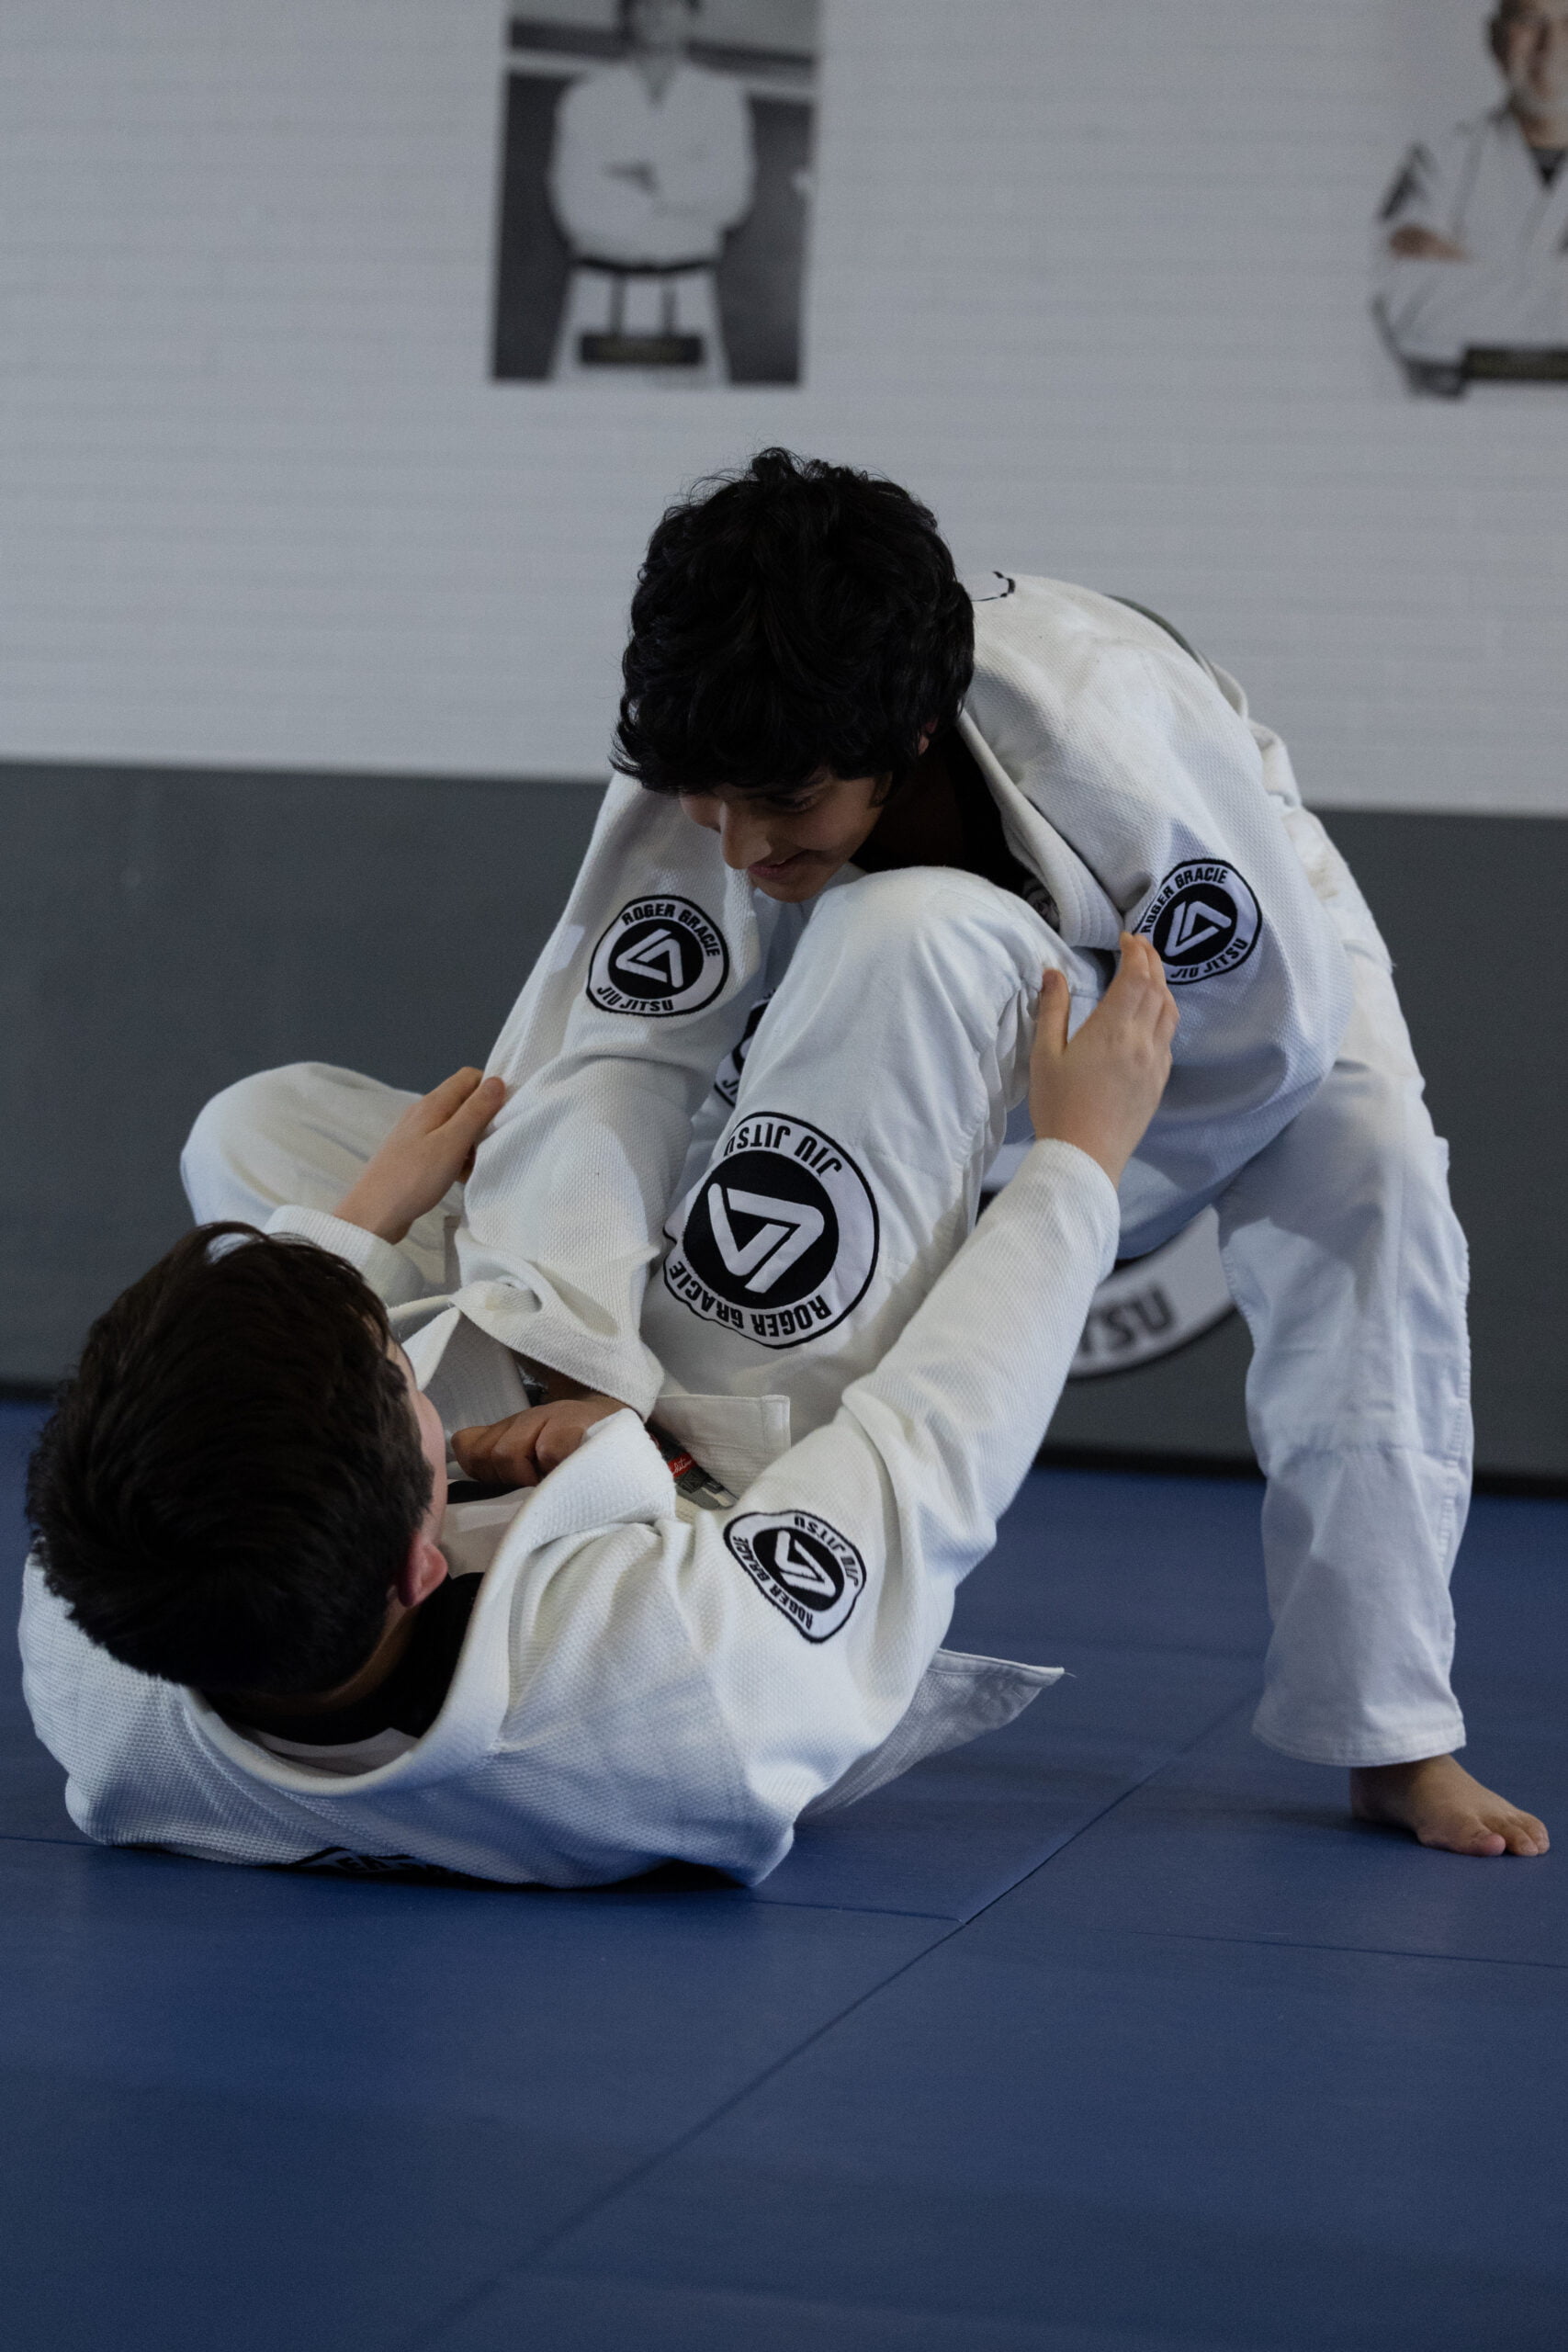 Two Roger Gracie Bristol students sparring. One led down playing guard and the other on top trying to pass the guard.